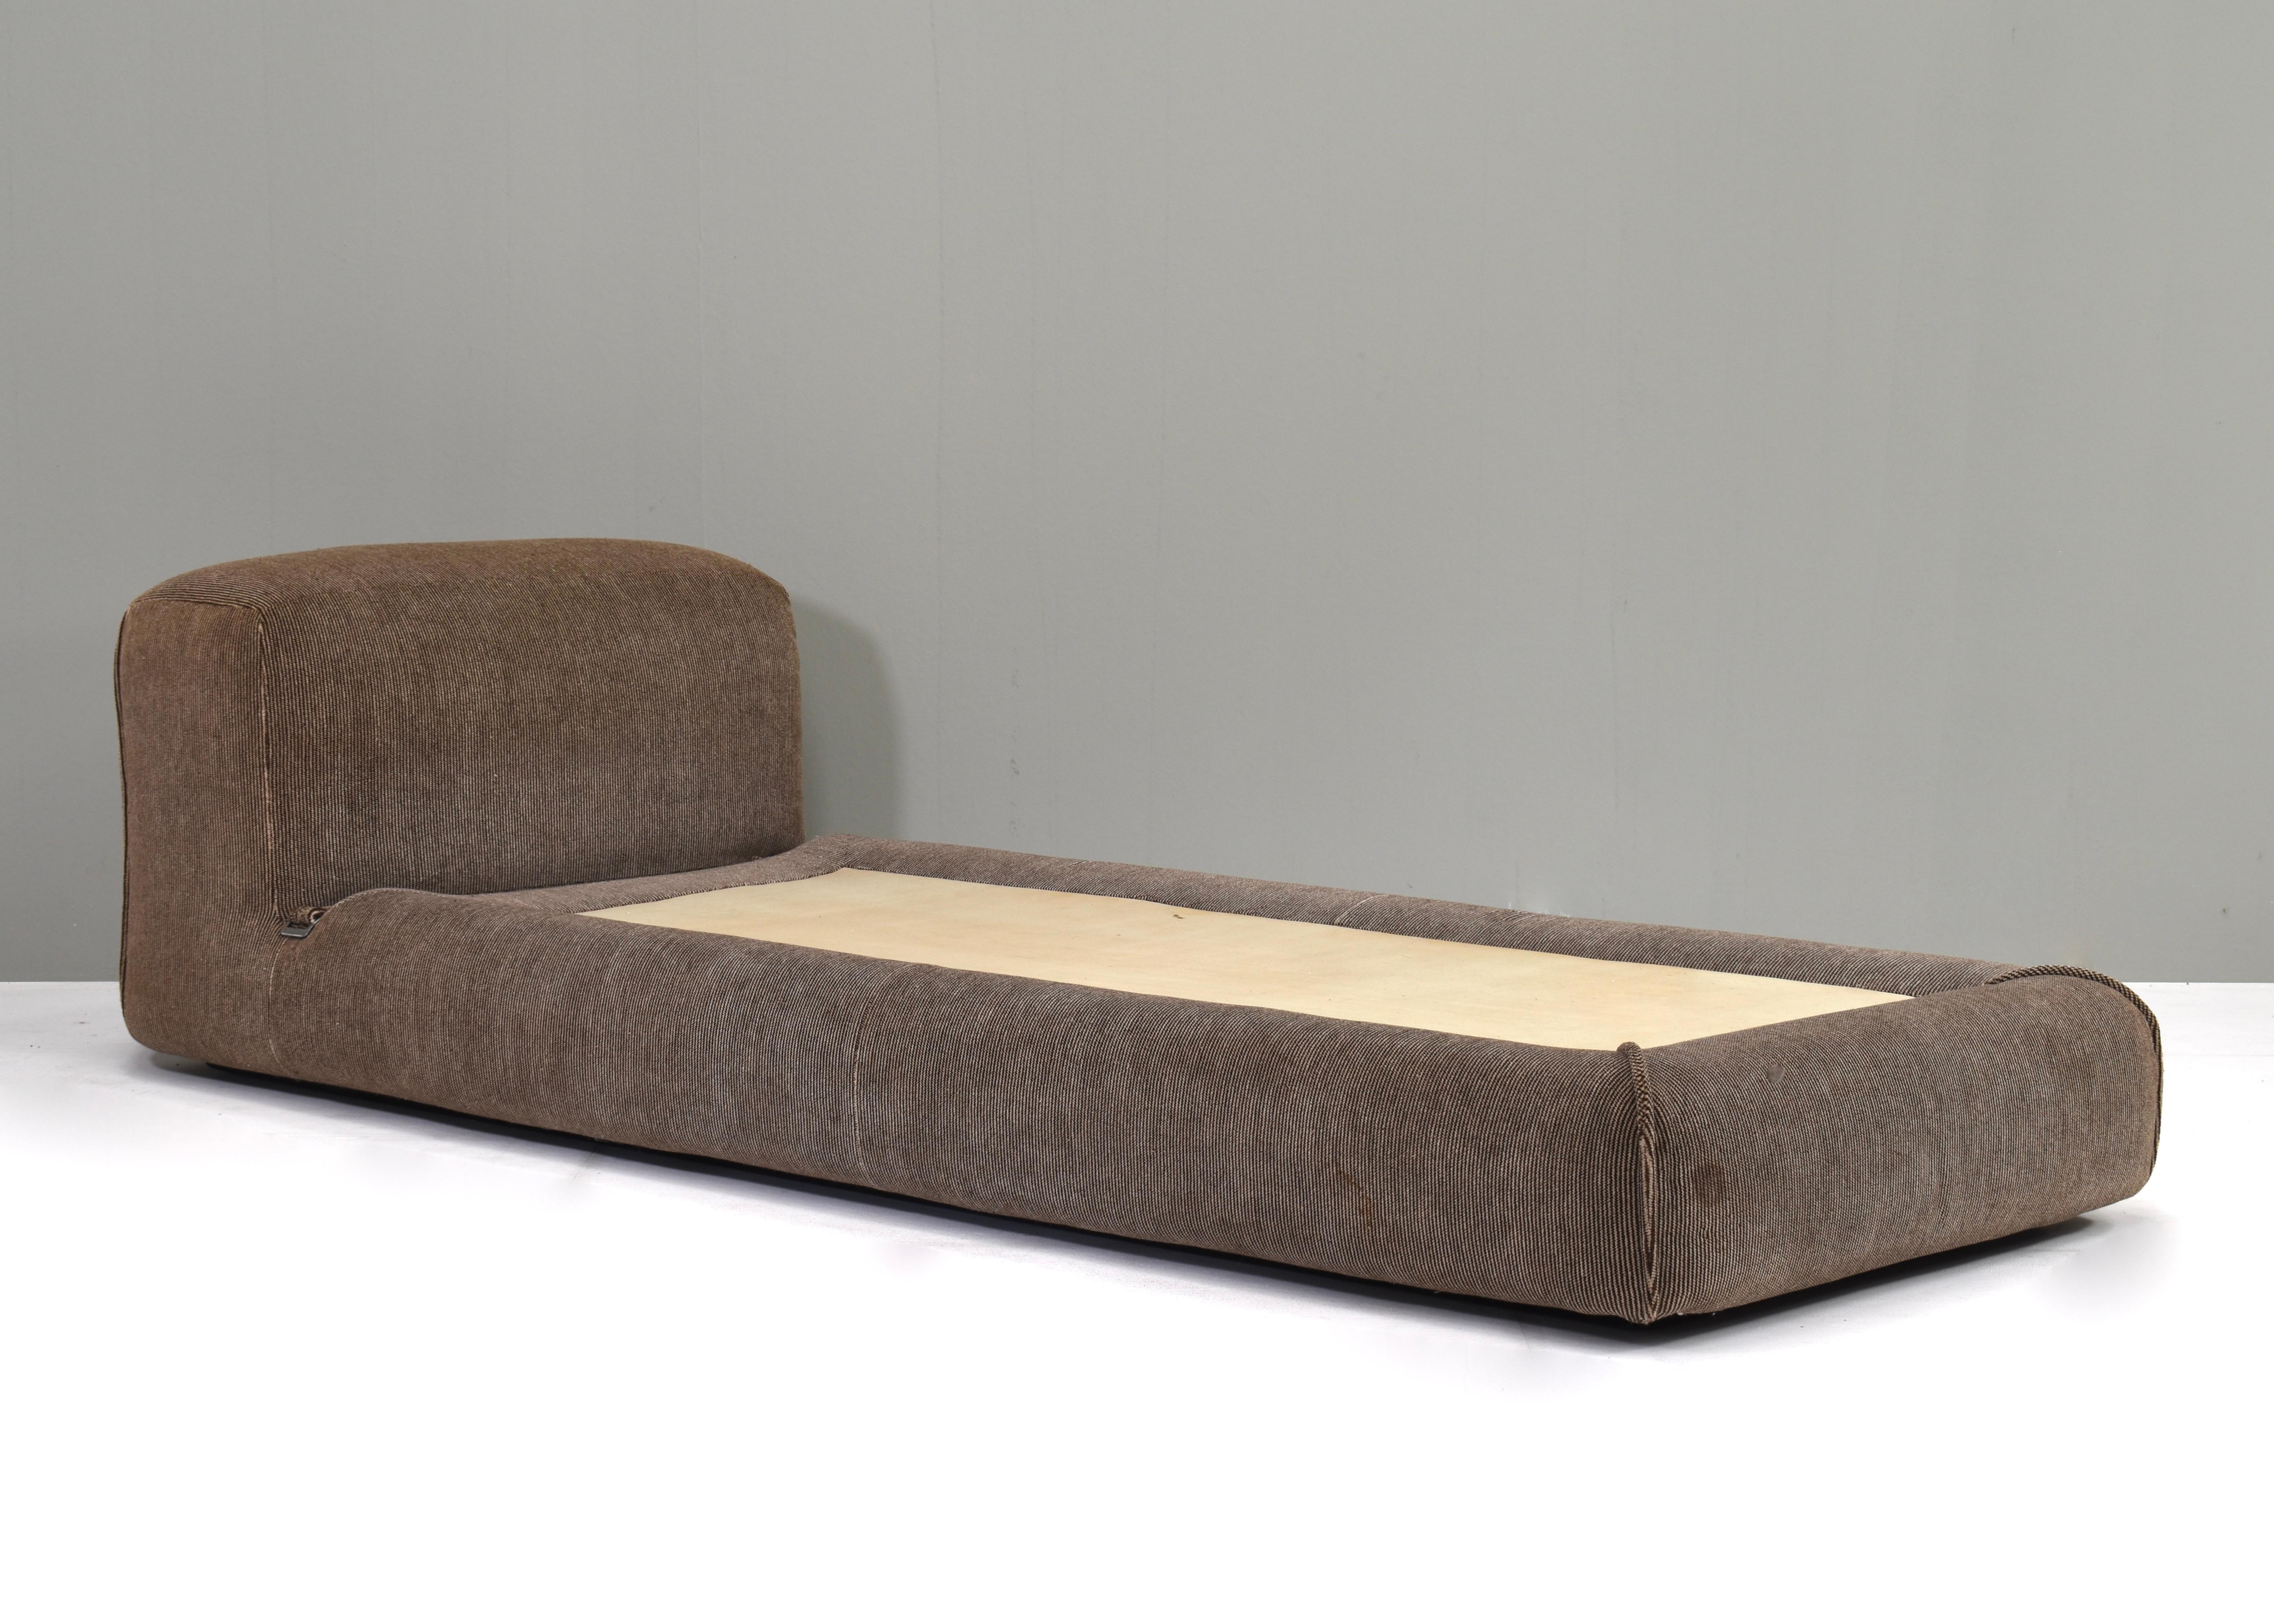 Rare ‘Le Mura’ daybed by Mario Bellini for Cassina – Italy, 1972.
The daybed still has the original Mohair velvet fabric.

Designer: Mario Bellini
Manufacturer: Cassina
Country: Italy
Model: Le Mura daybed
Design period: 1972
Date of